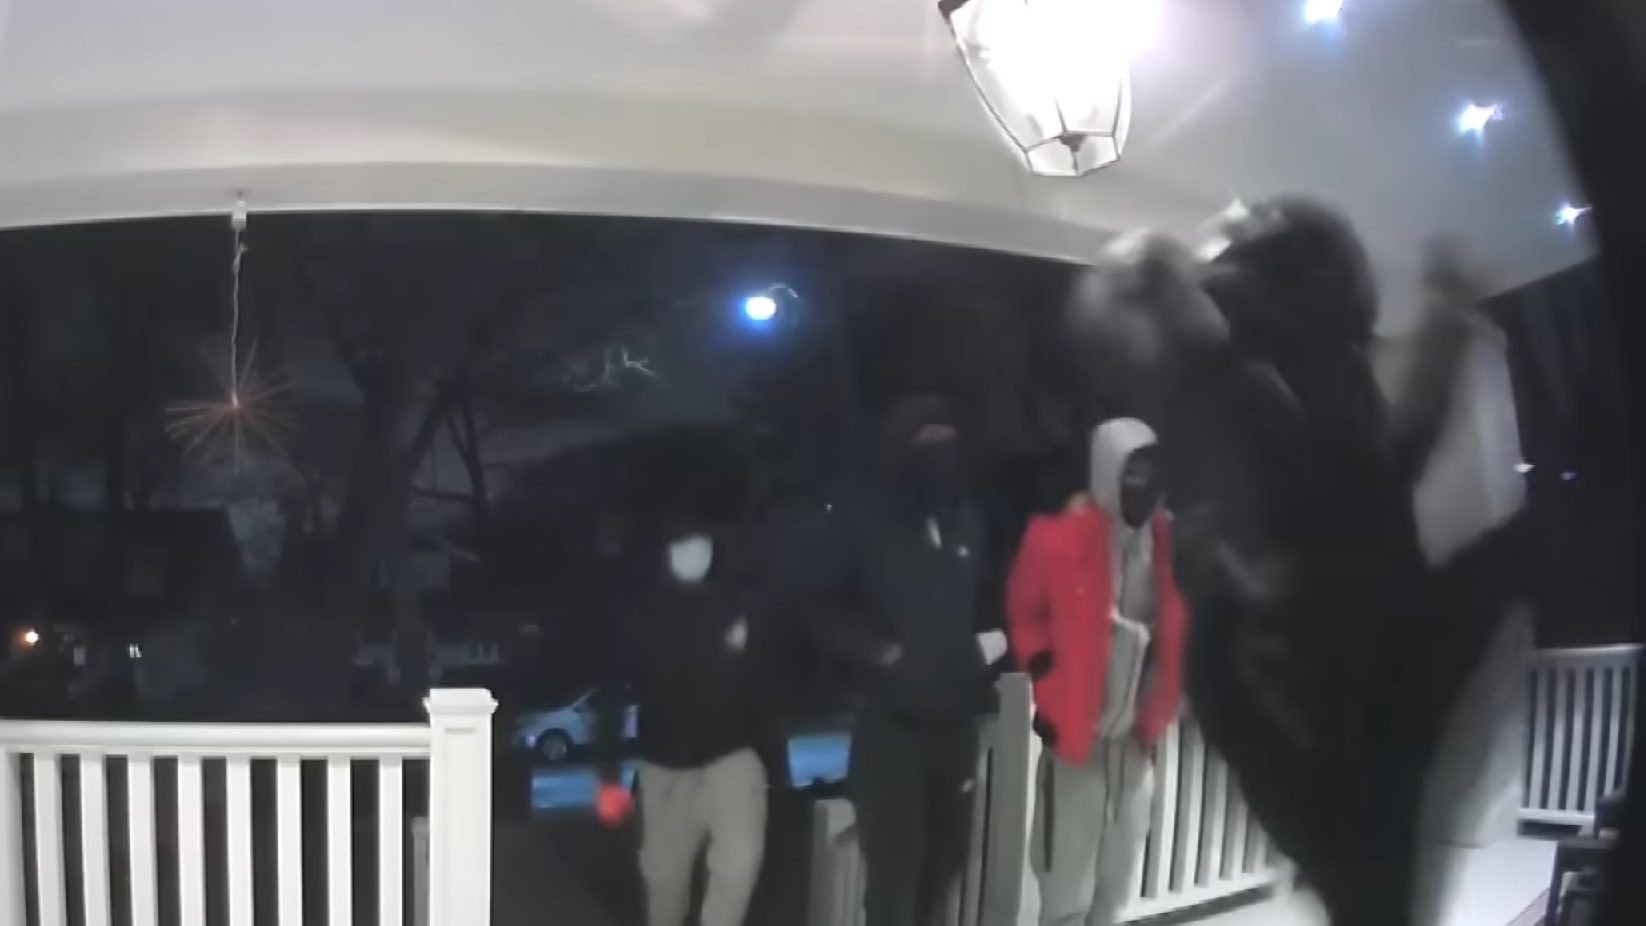 Thieves breaking into a home. 